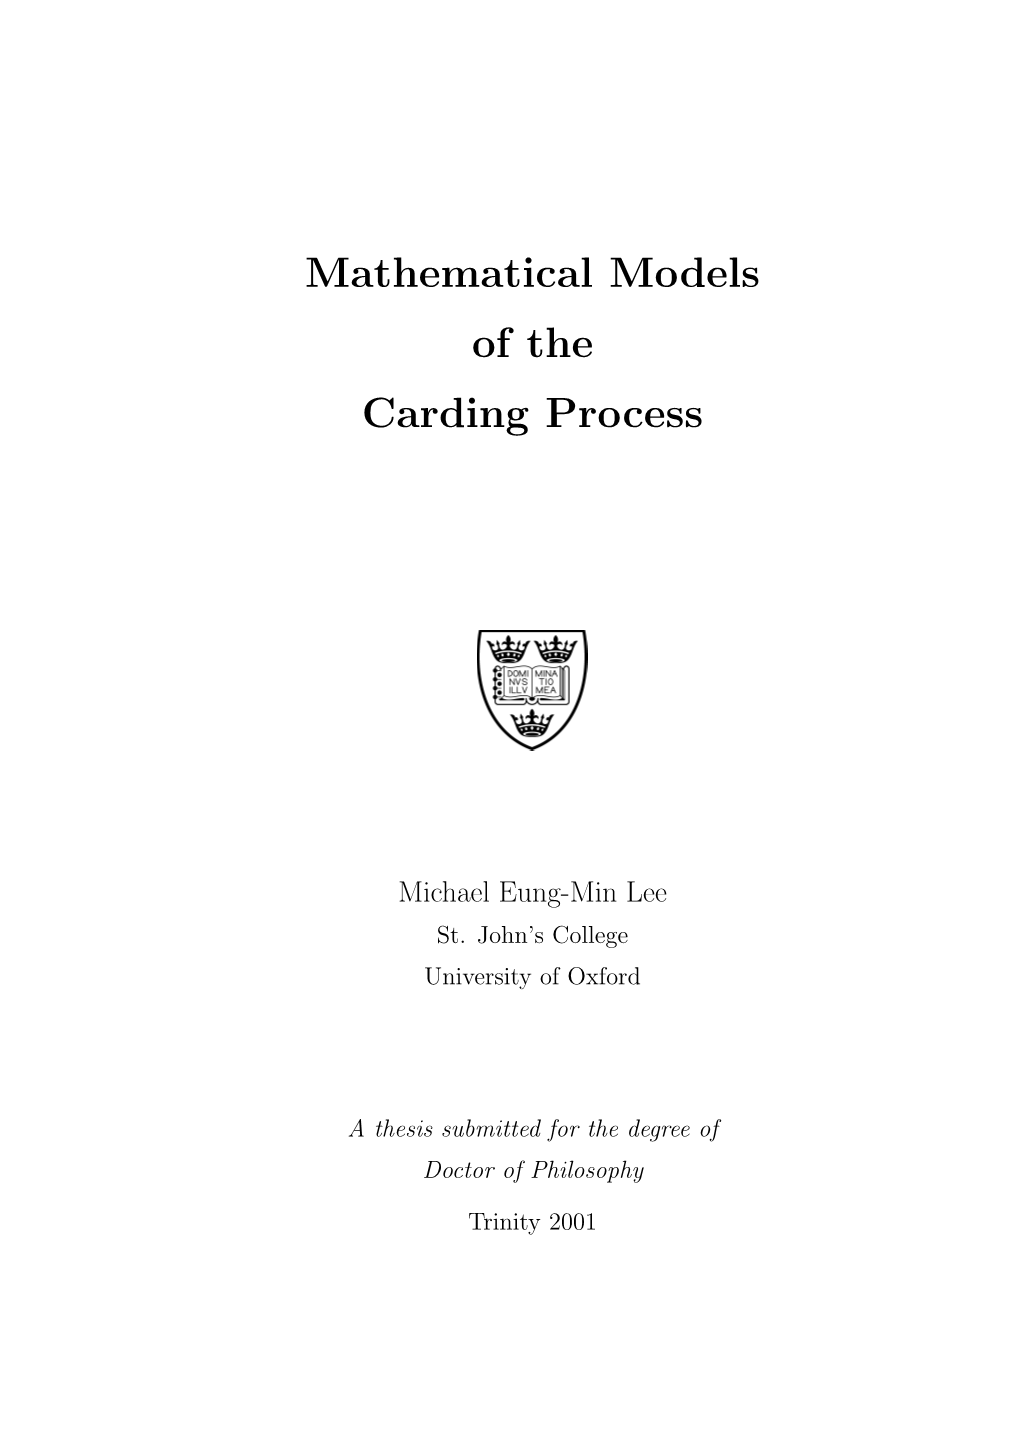 Mathematical Models of the Carding Process